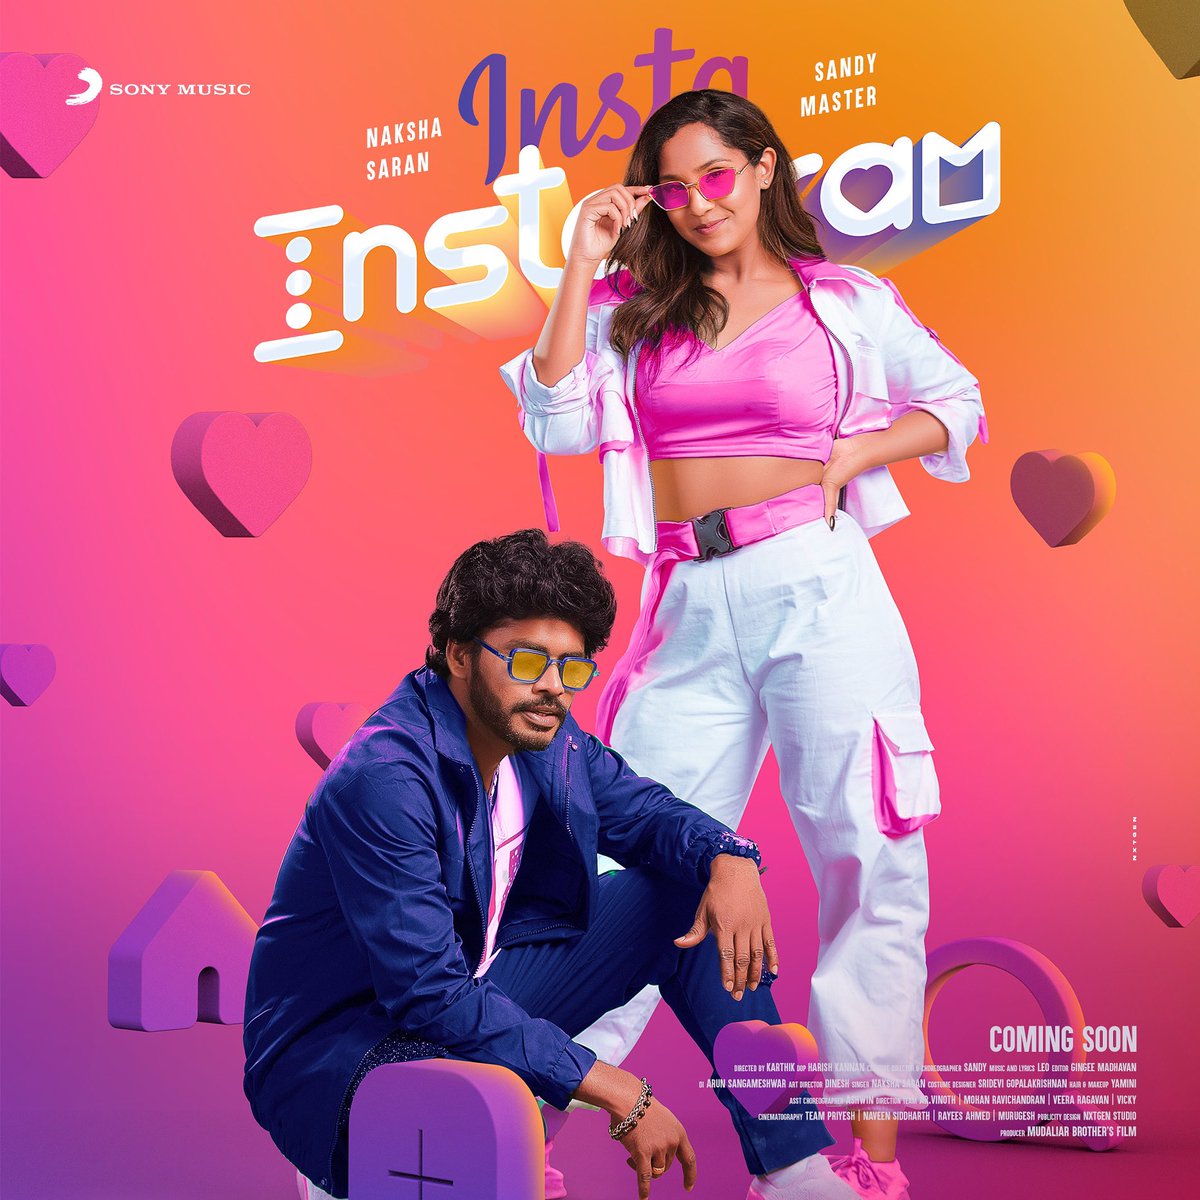 Here goes the teaser for “Insta Instagram”!!🥰🔥 youtu.be/WEPEq5E7W9o RELEASING ON THE 23rd of February!!🤞🏼🧿 @iamSandy_Off @SonyMusicSouth #instainstagram #SonyMusicSouth